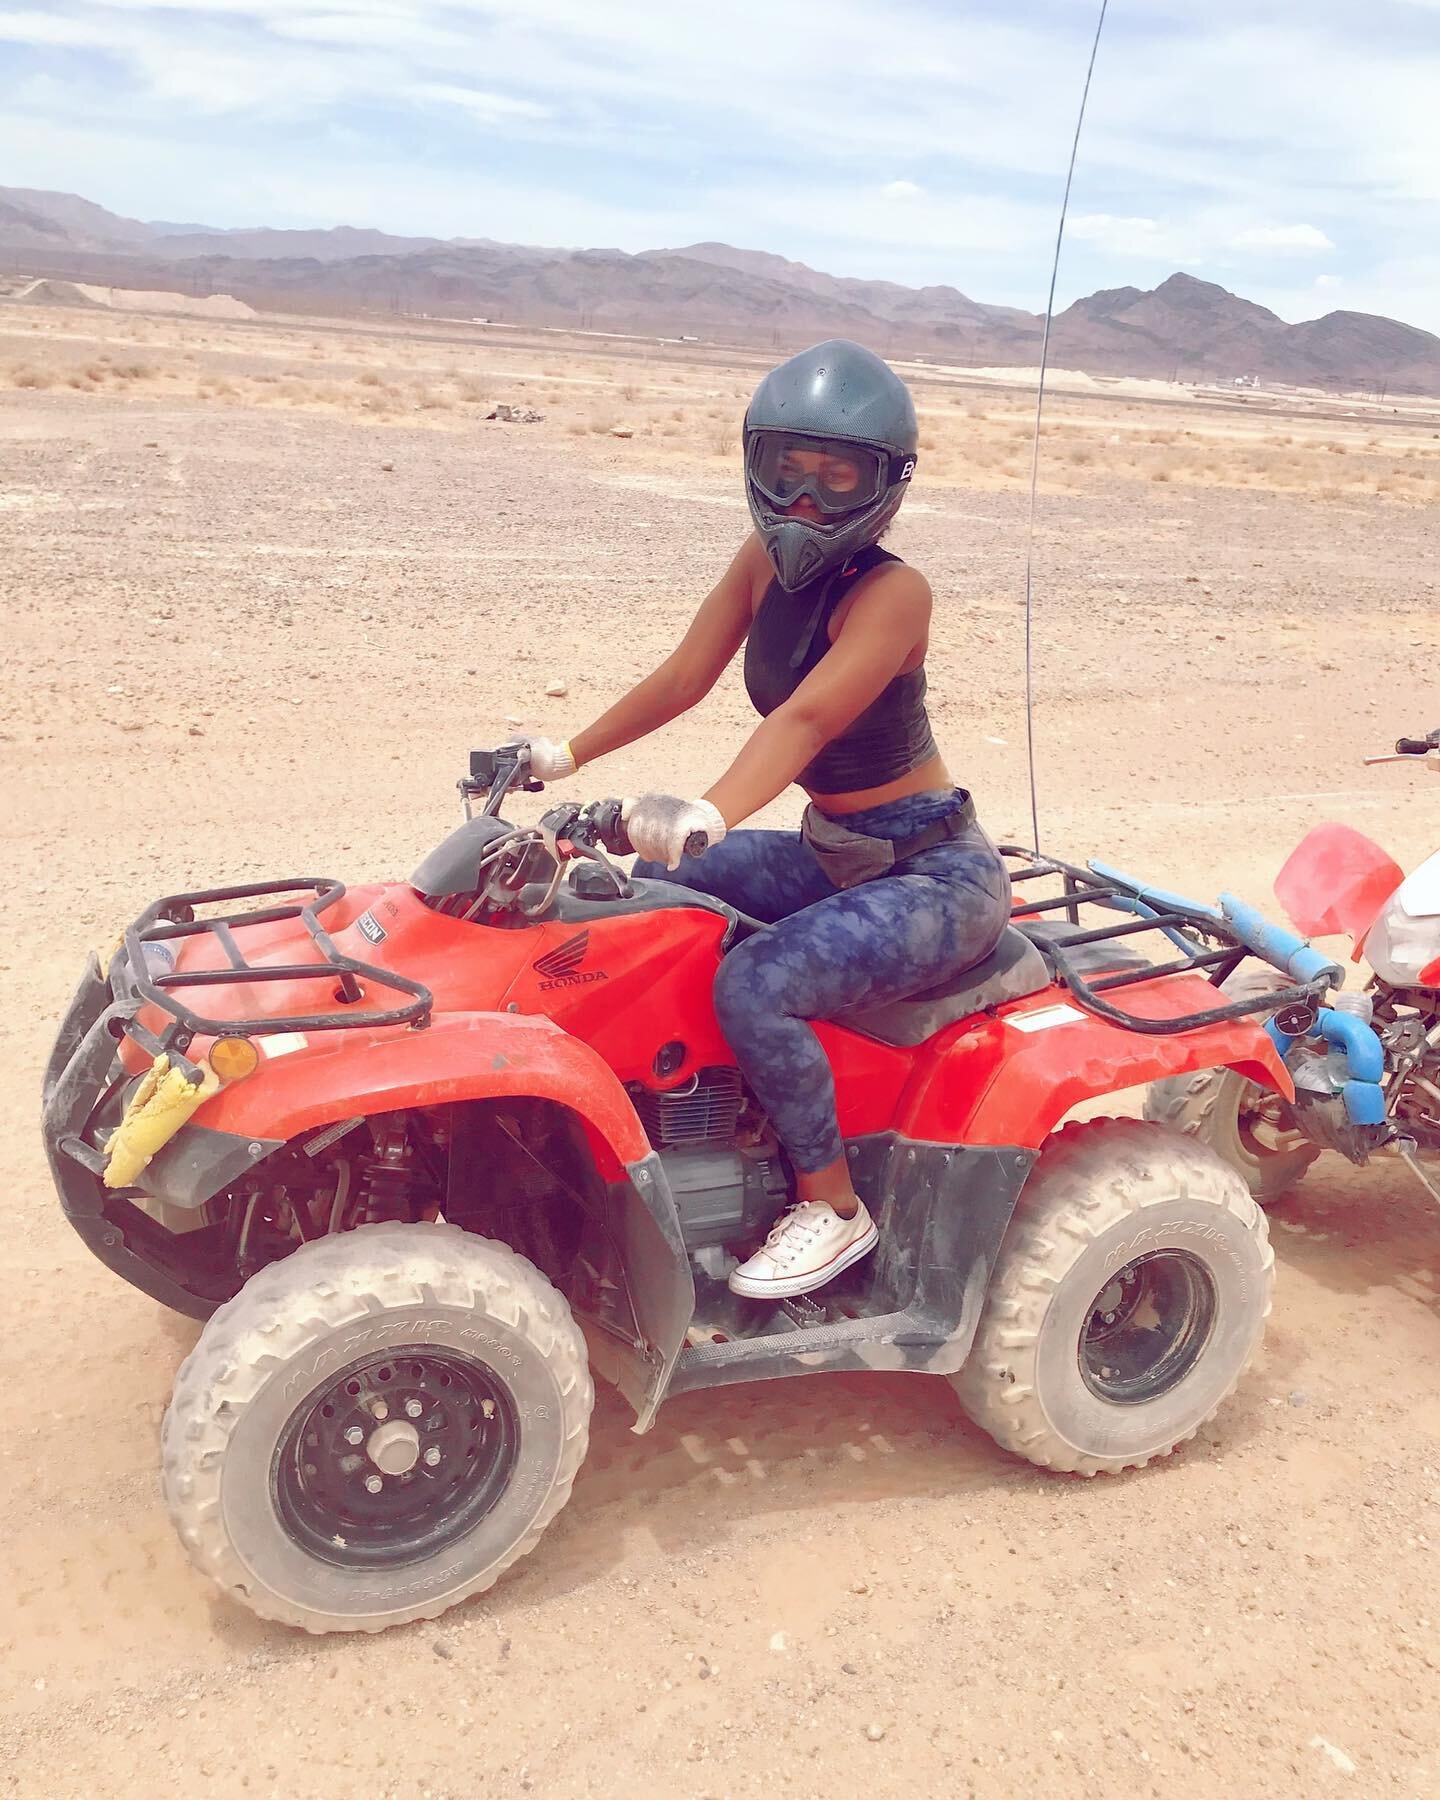 One of my 2022 goals was to ride ATVs! 🏁Sooo happy that I got a chance to experience this! That desert sand ain&rsquo;t no joke though 🥴🤣
&bull;
&bull;
&bull;
#atvriding #4wheelers #dirtbikelife